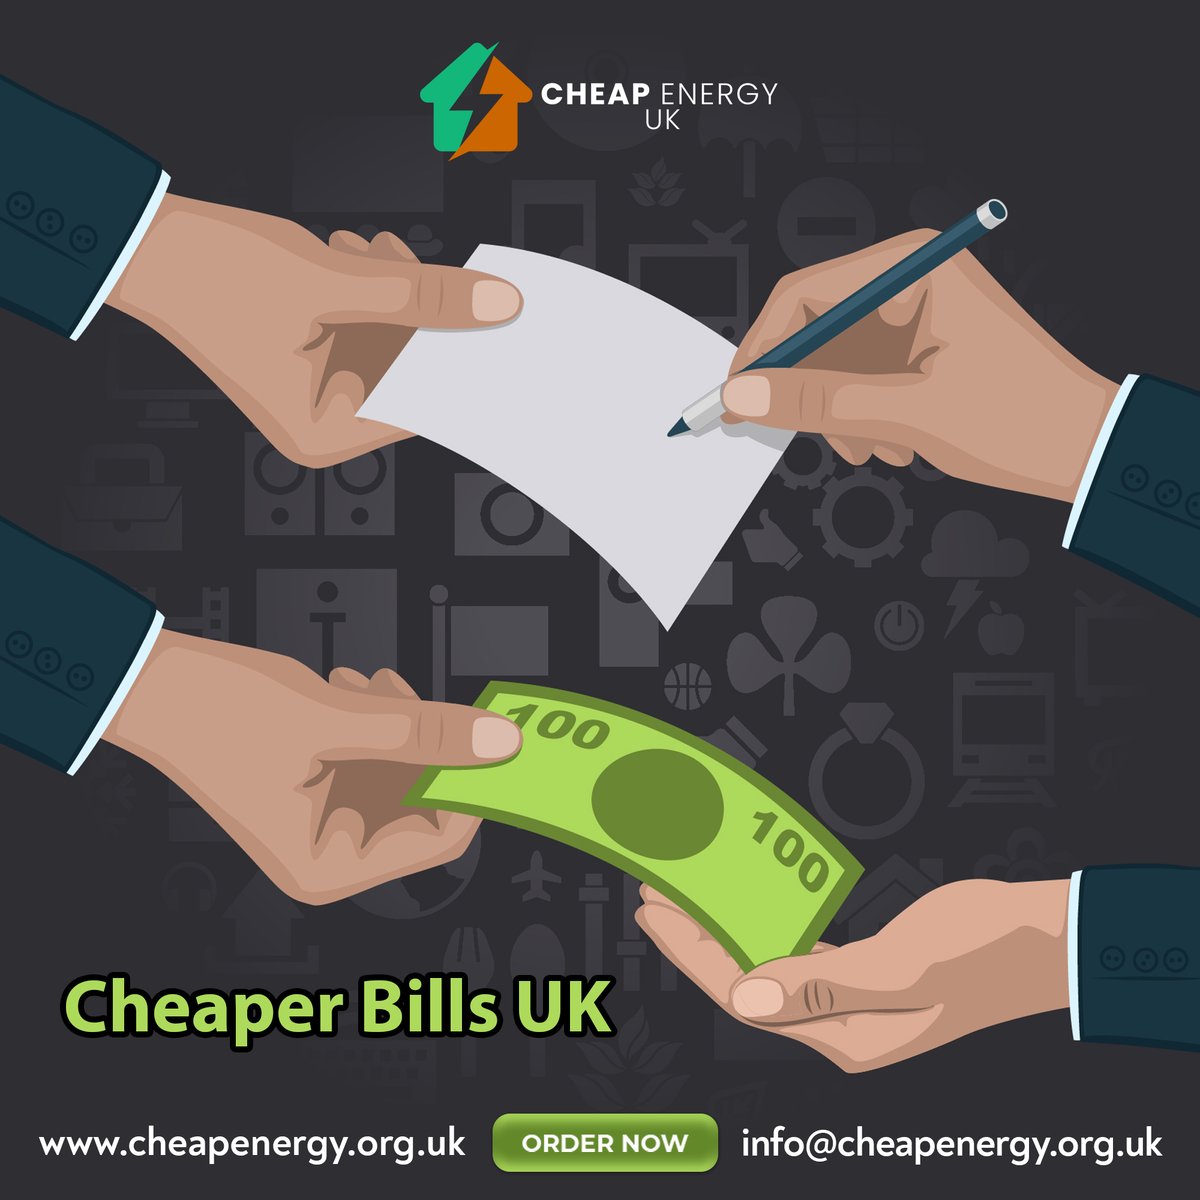 𝑪𝒉𝒆𝒂𝒑𝒆𝒓 𝑩𝒊𝒍𝒍𝒔 𝒊𝒏 𝑼𝑲!!

Or energy cost are below the government price cap switch to us and increase your savings. Utilise our bundling services to lower your energy costs and save money on your household bills.
07534 102497
#reducebills #energysupplier #lowerbills